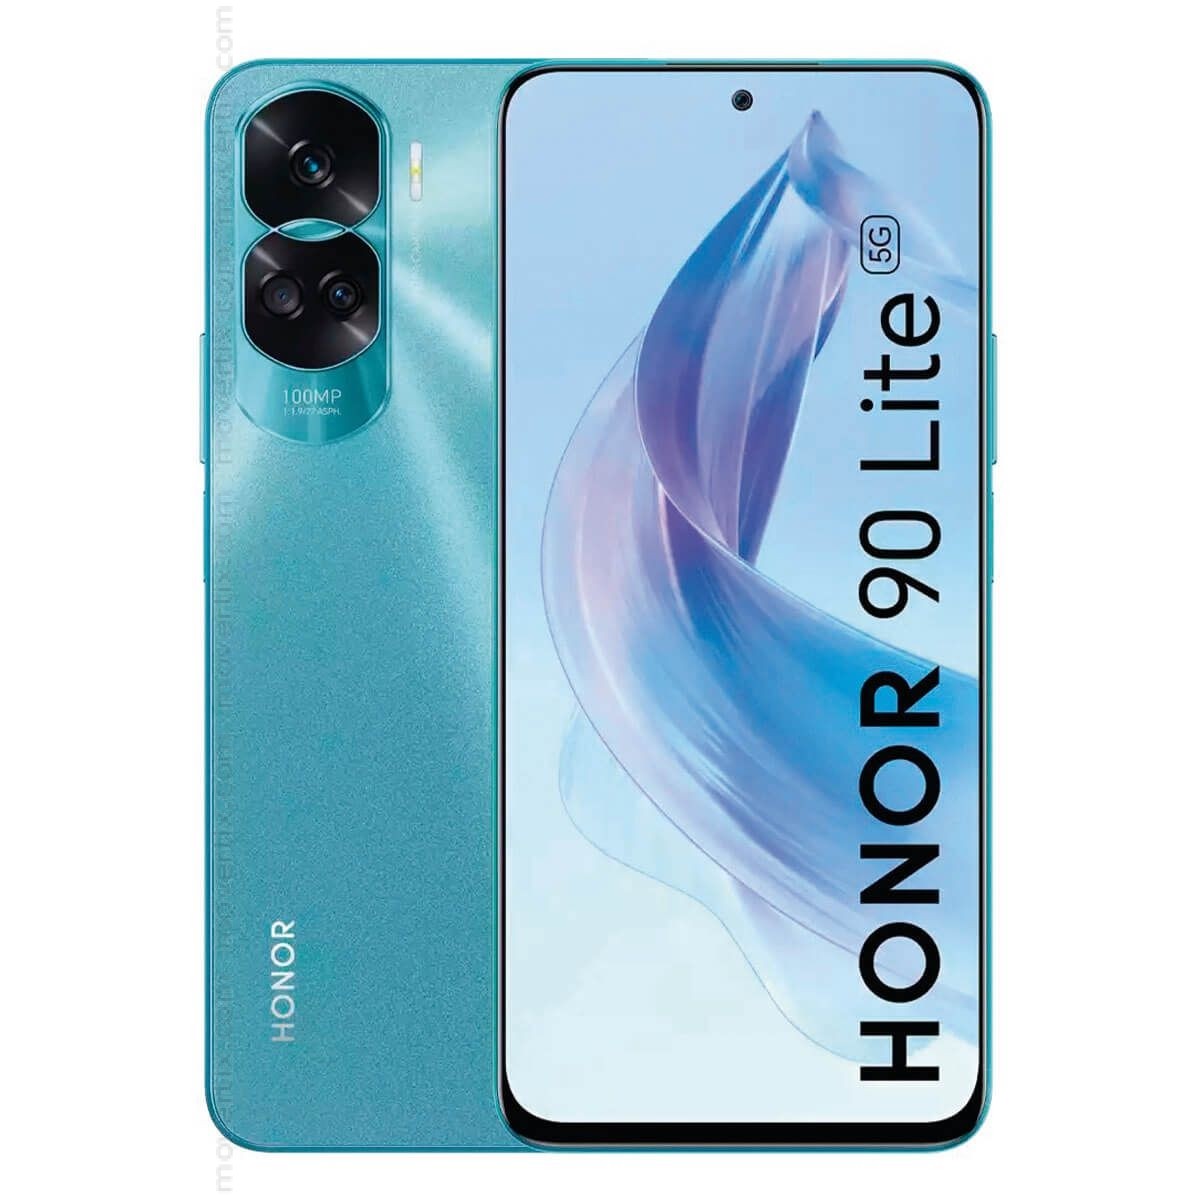 honor-90-lite-specs-price-reviews-and-best-deals